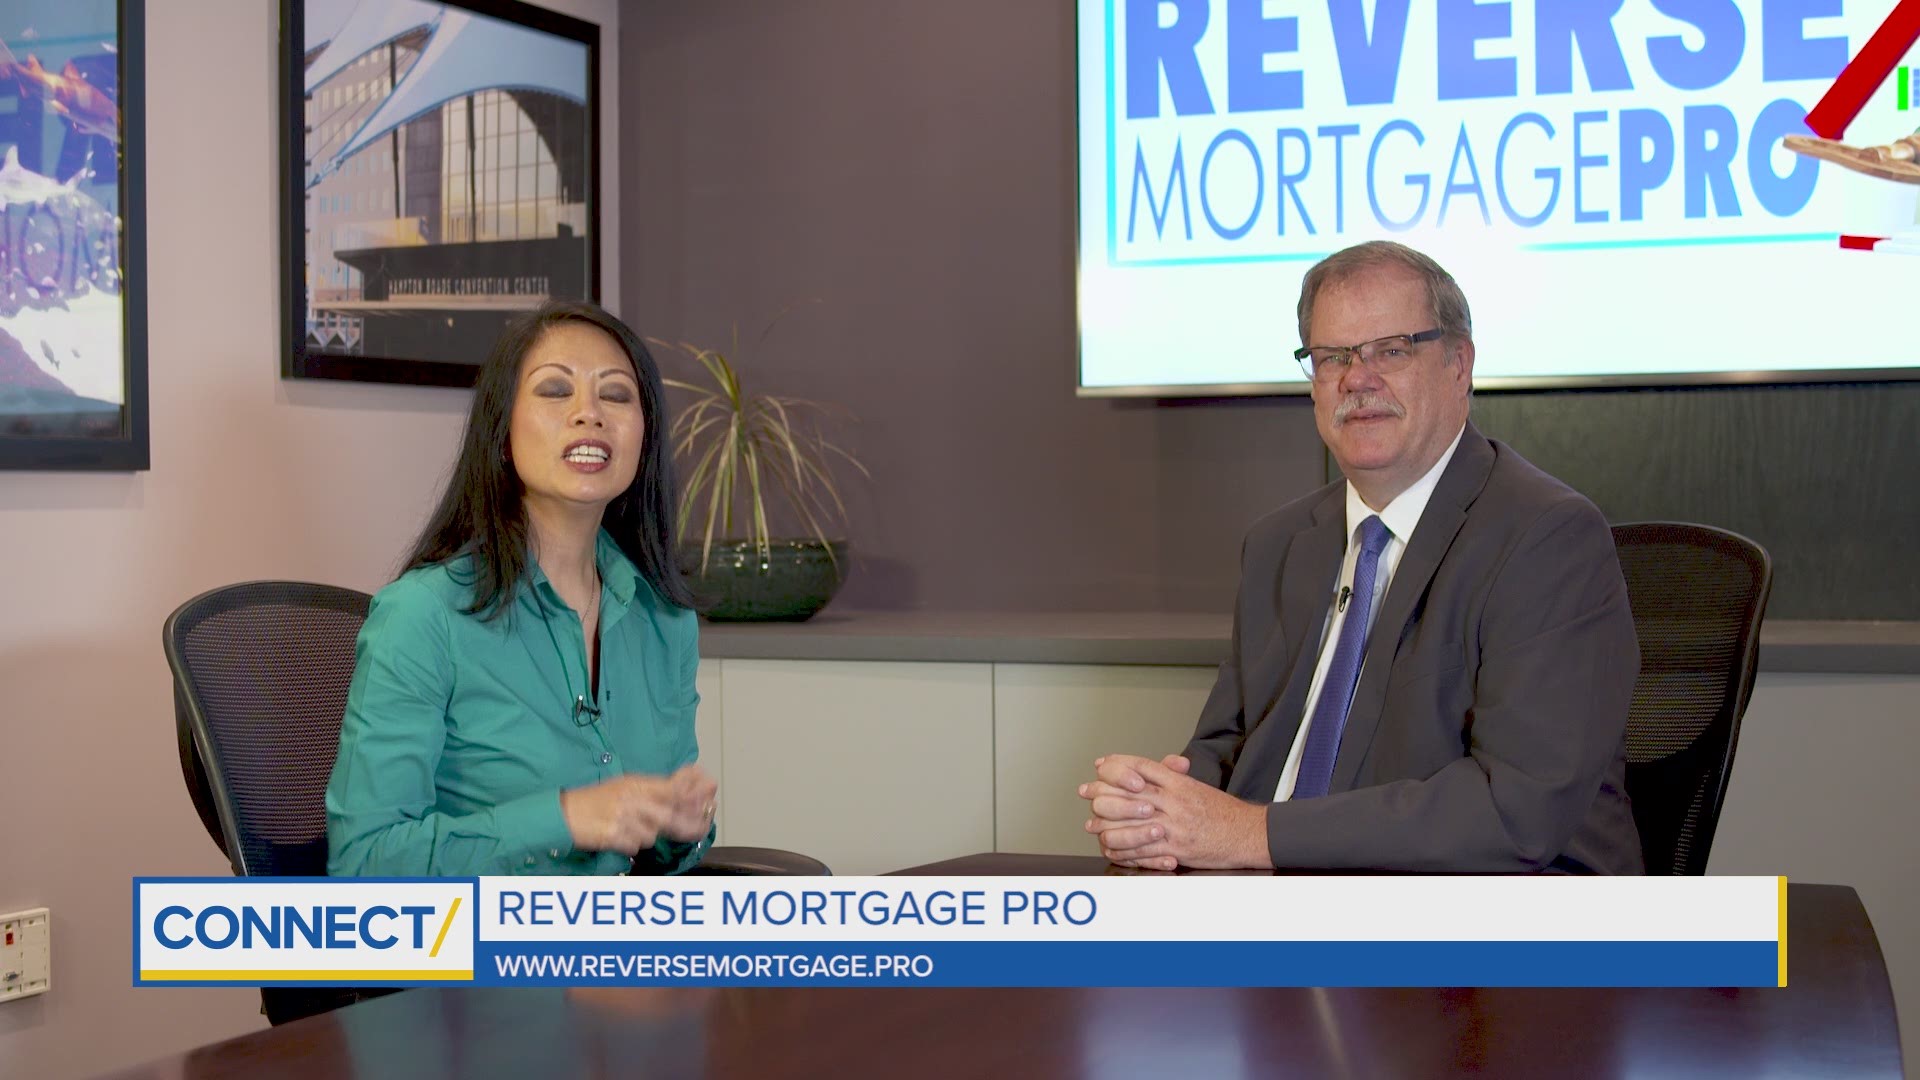 Learn the basics of reverse mortgages.